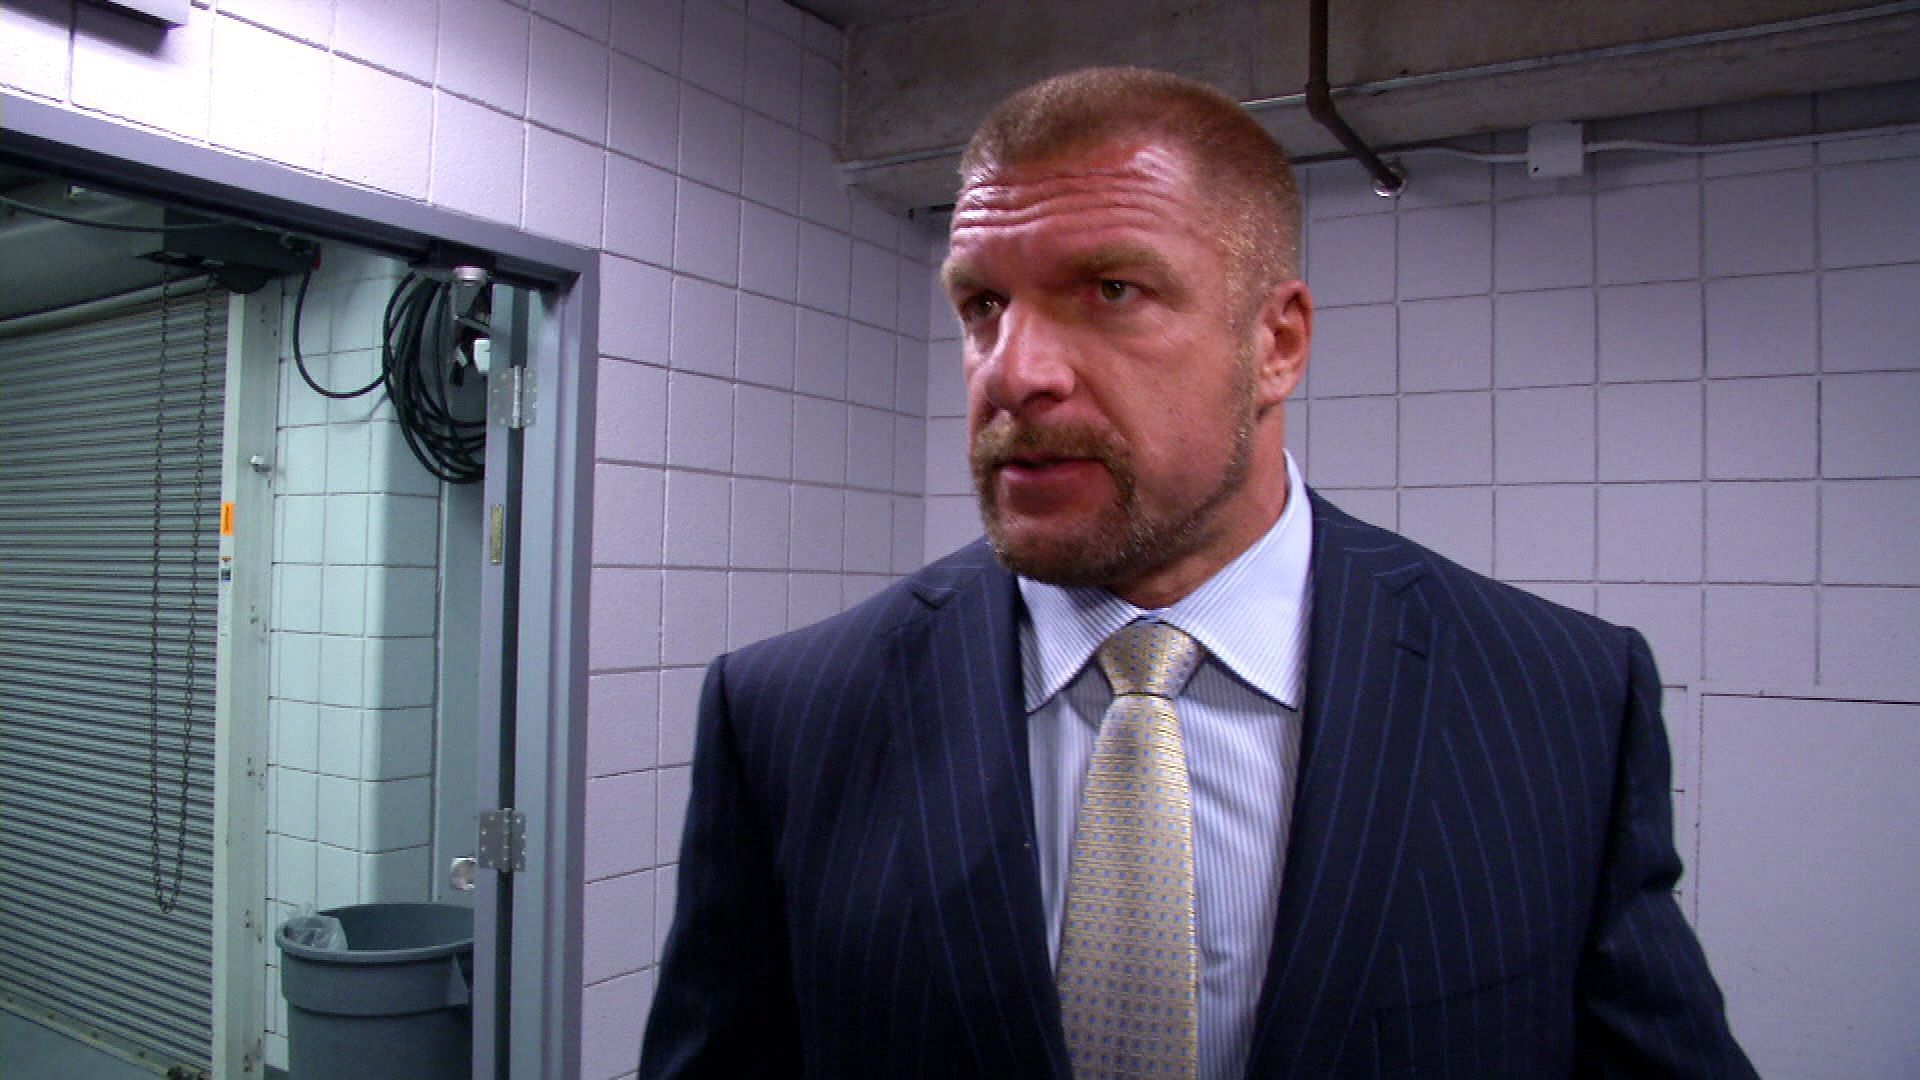 HHH is one of the most powerful person in wrestling today.